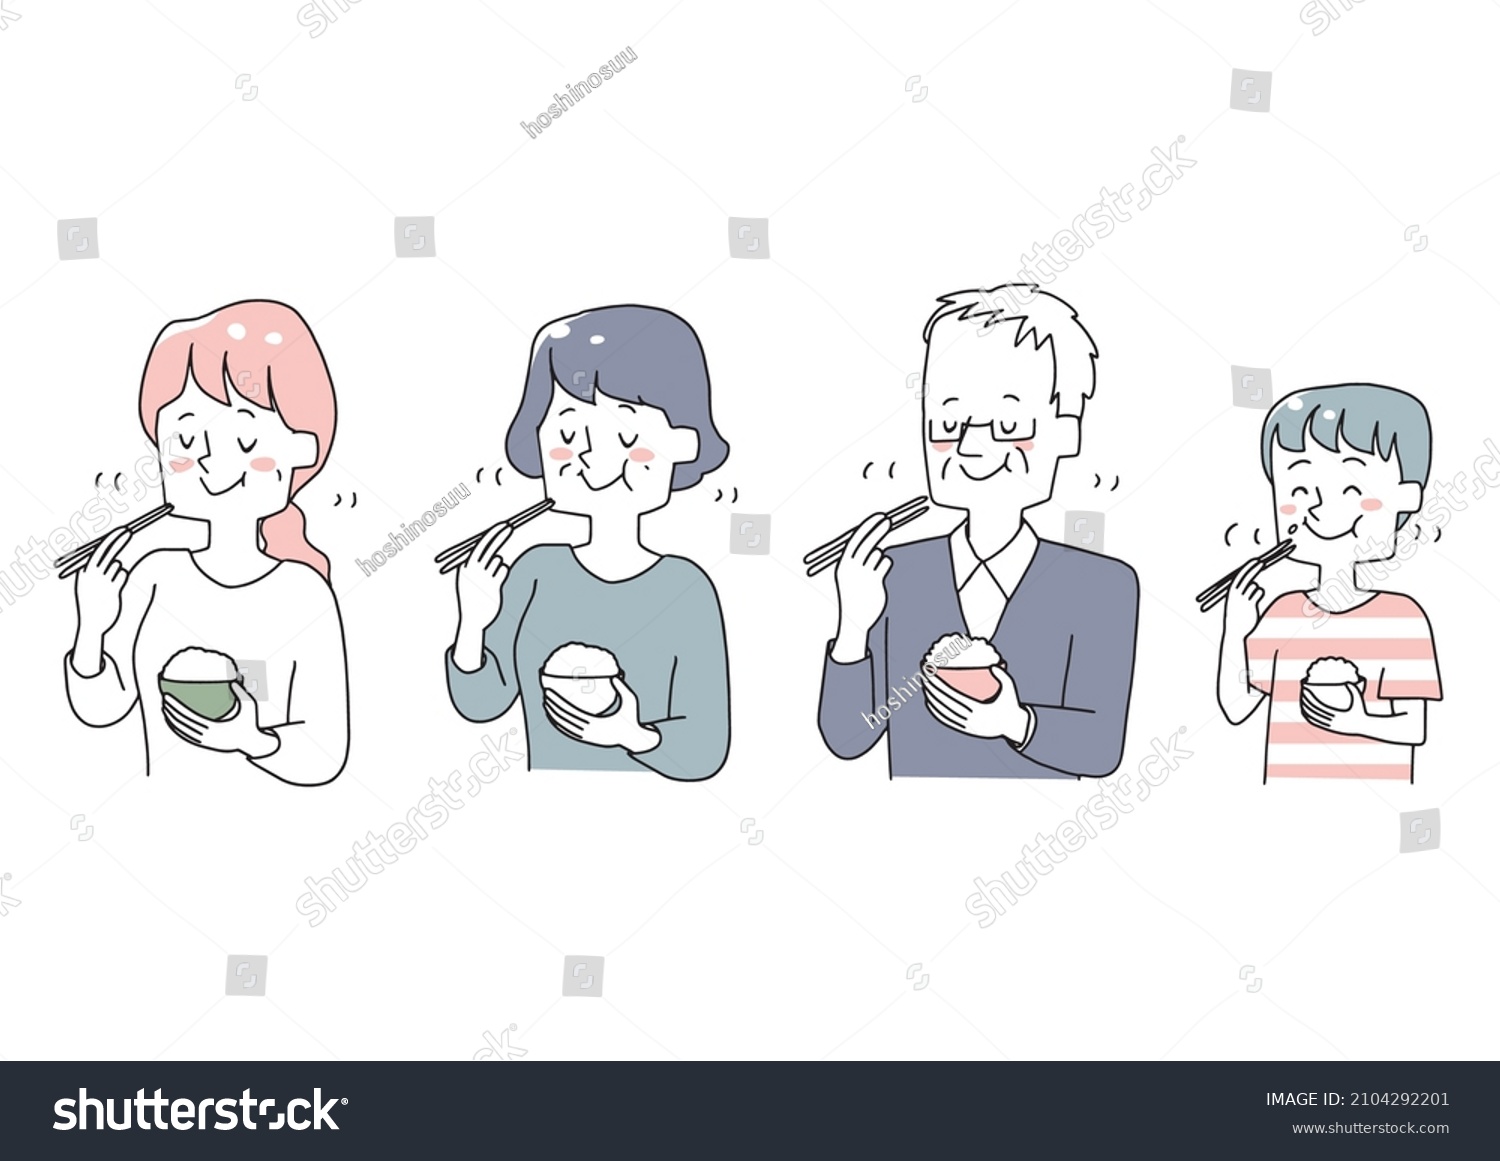 SVG of A set of people of various ages who chew well and eat. Warm hand-drawn person illustrations. svg